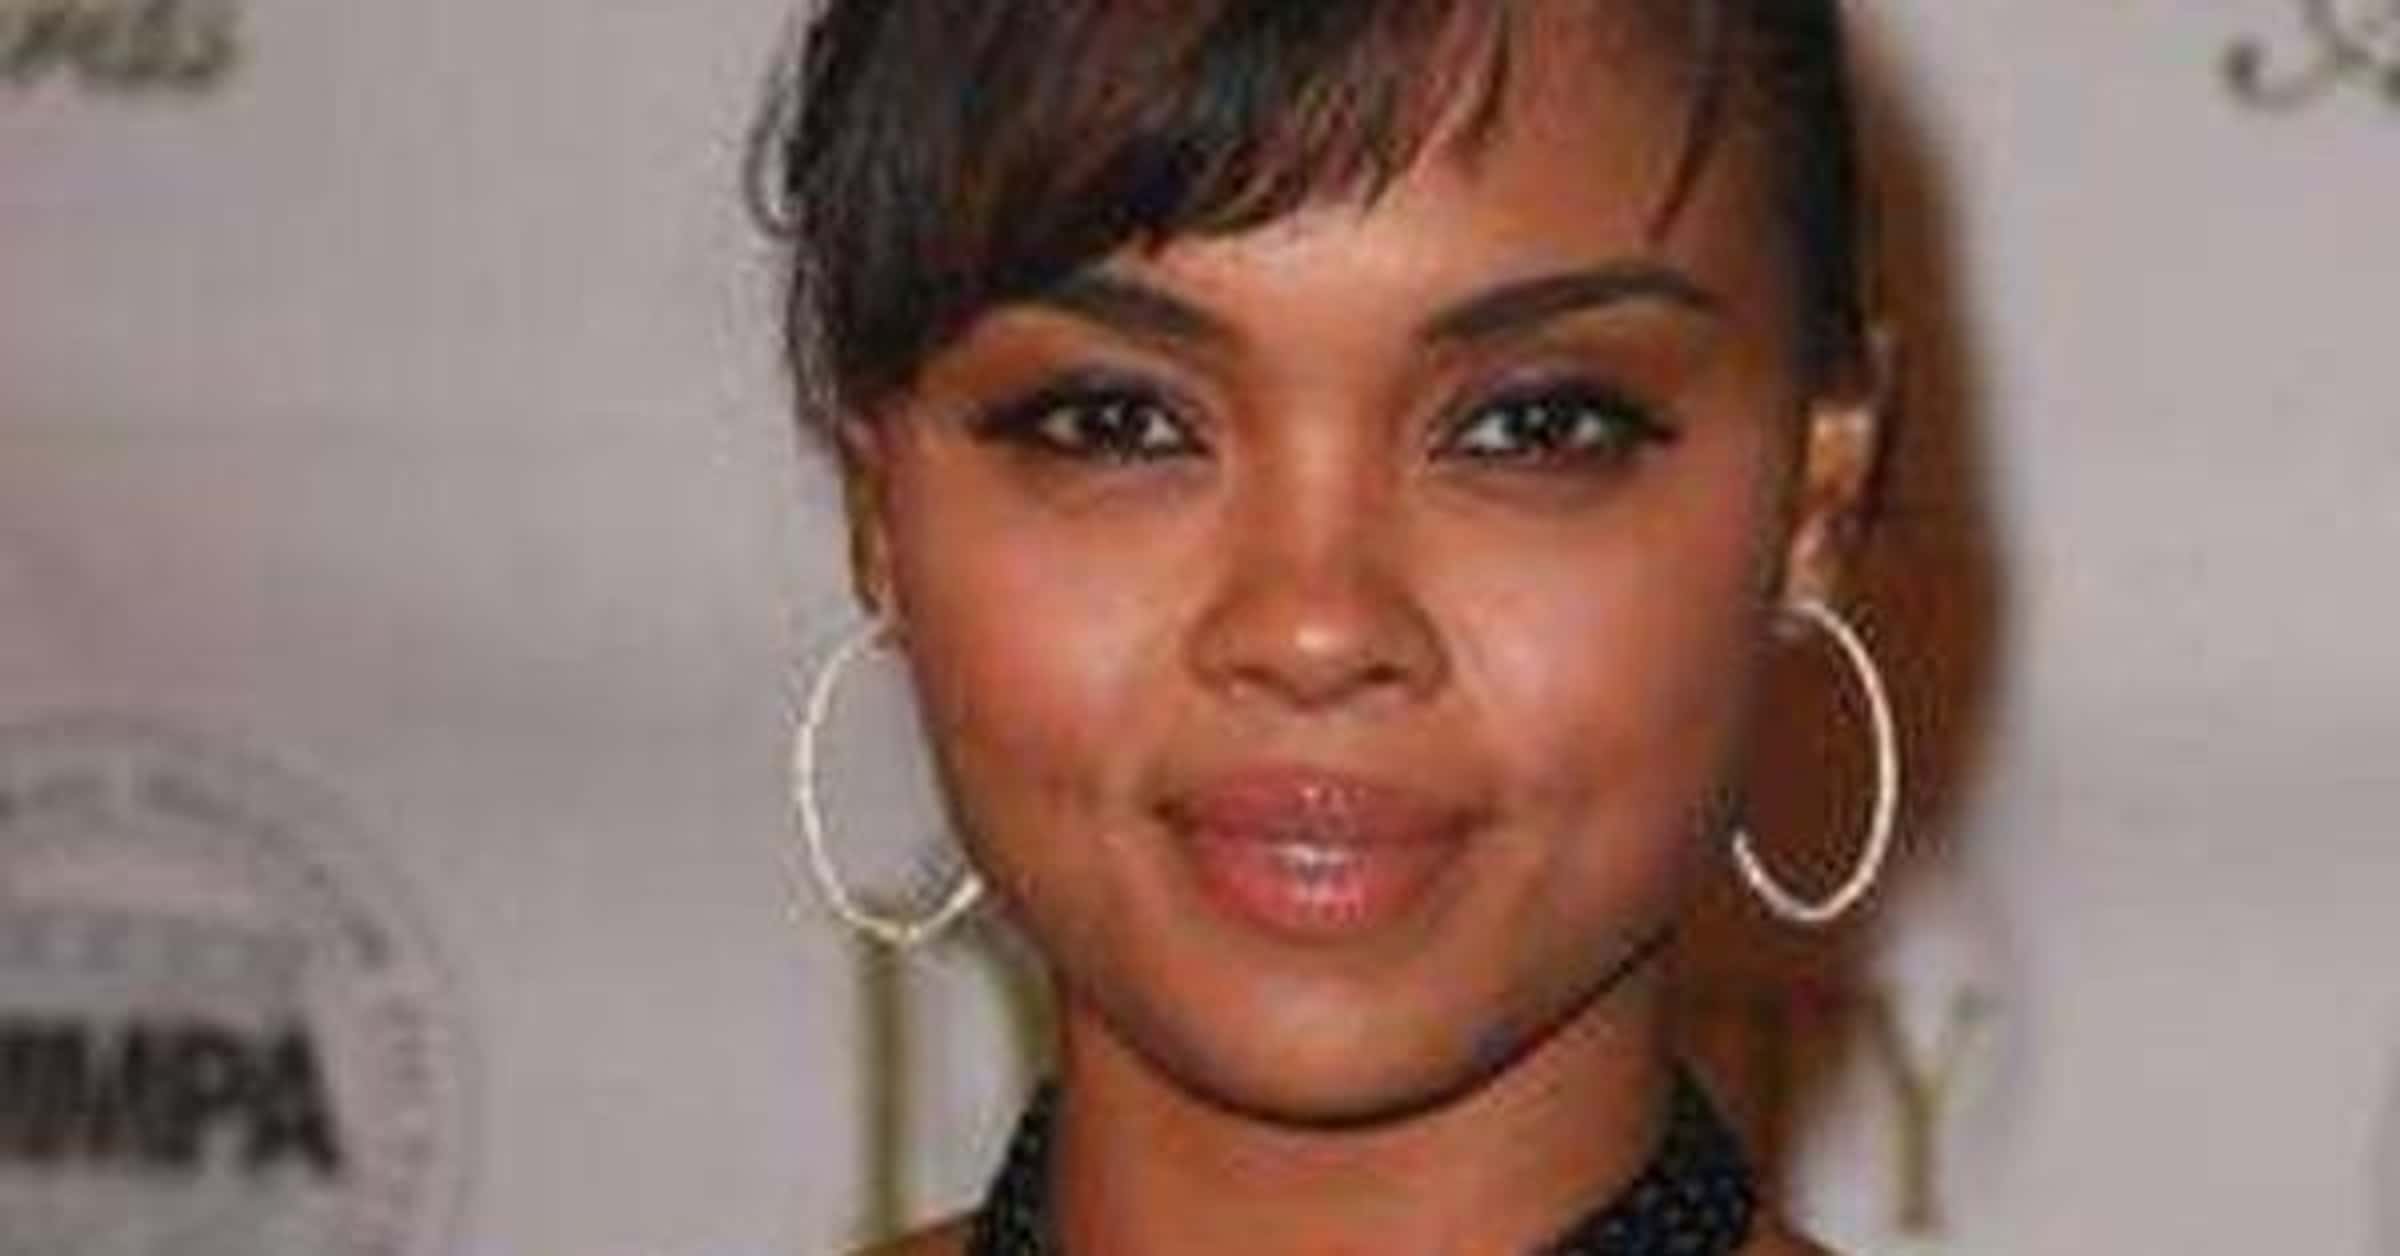 sharon leal and grayson mccouch